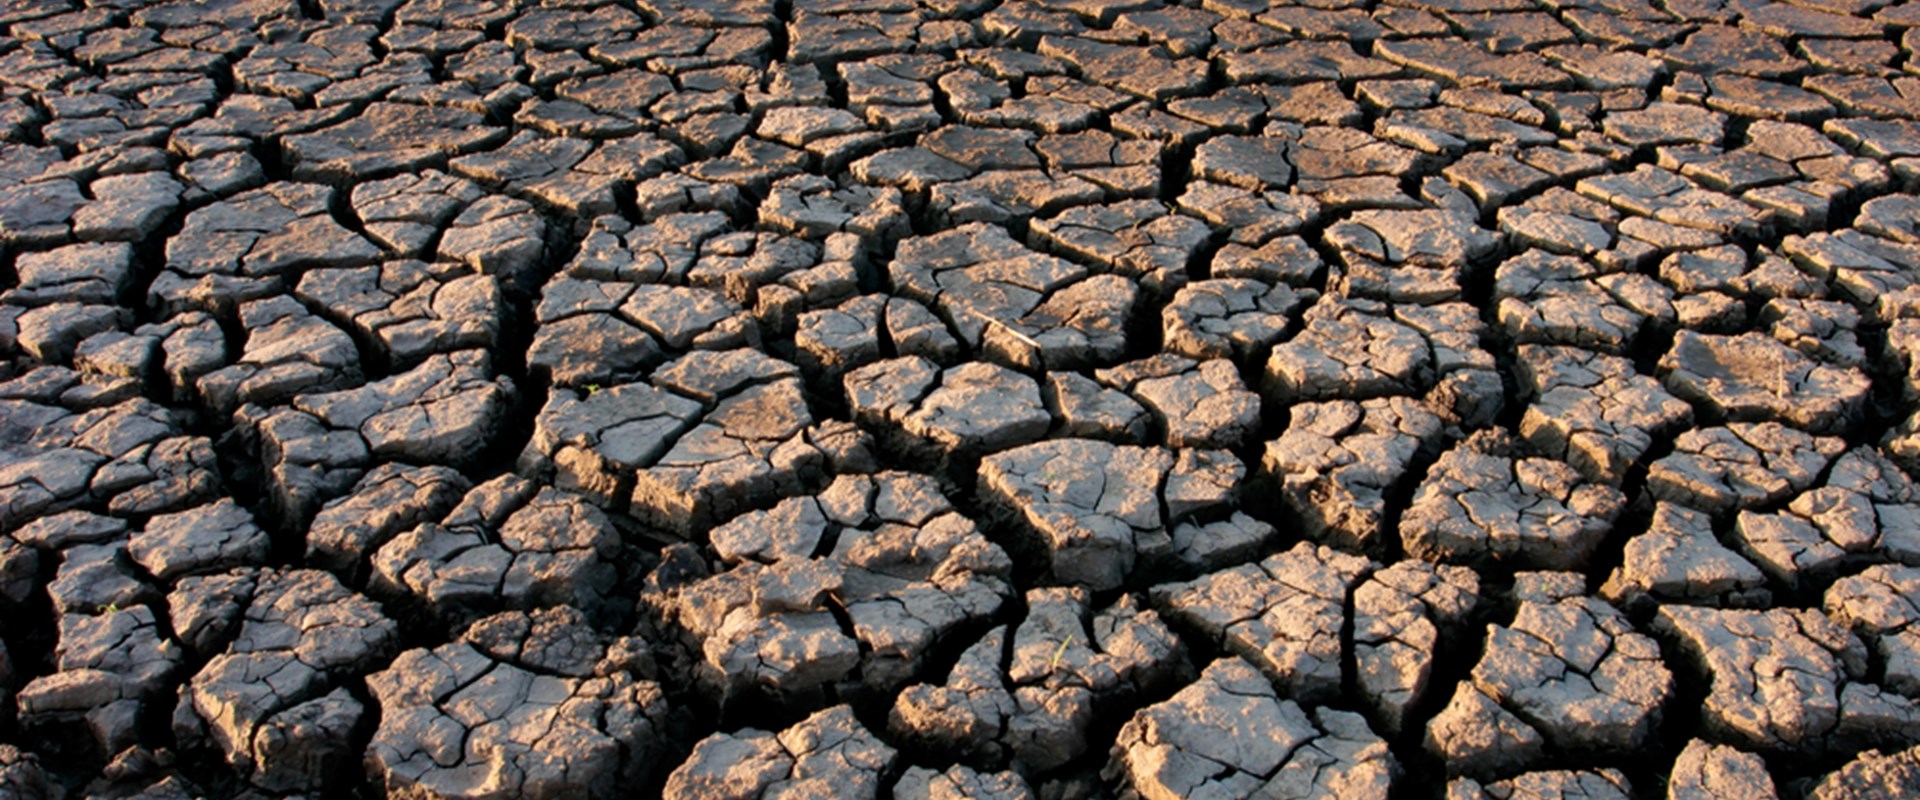 An image showing dry land with cracked earth to depict drought